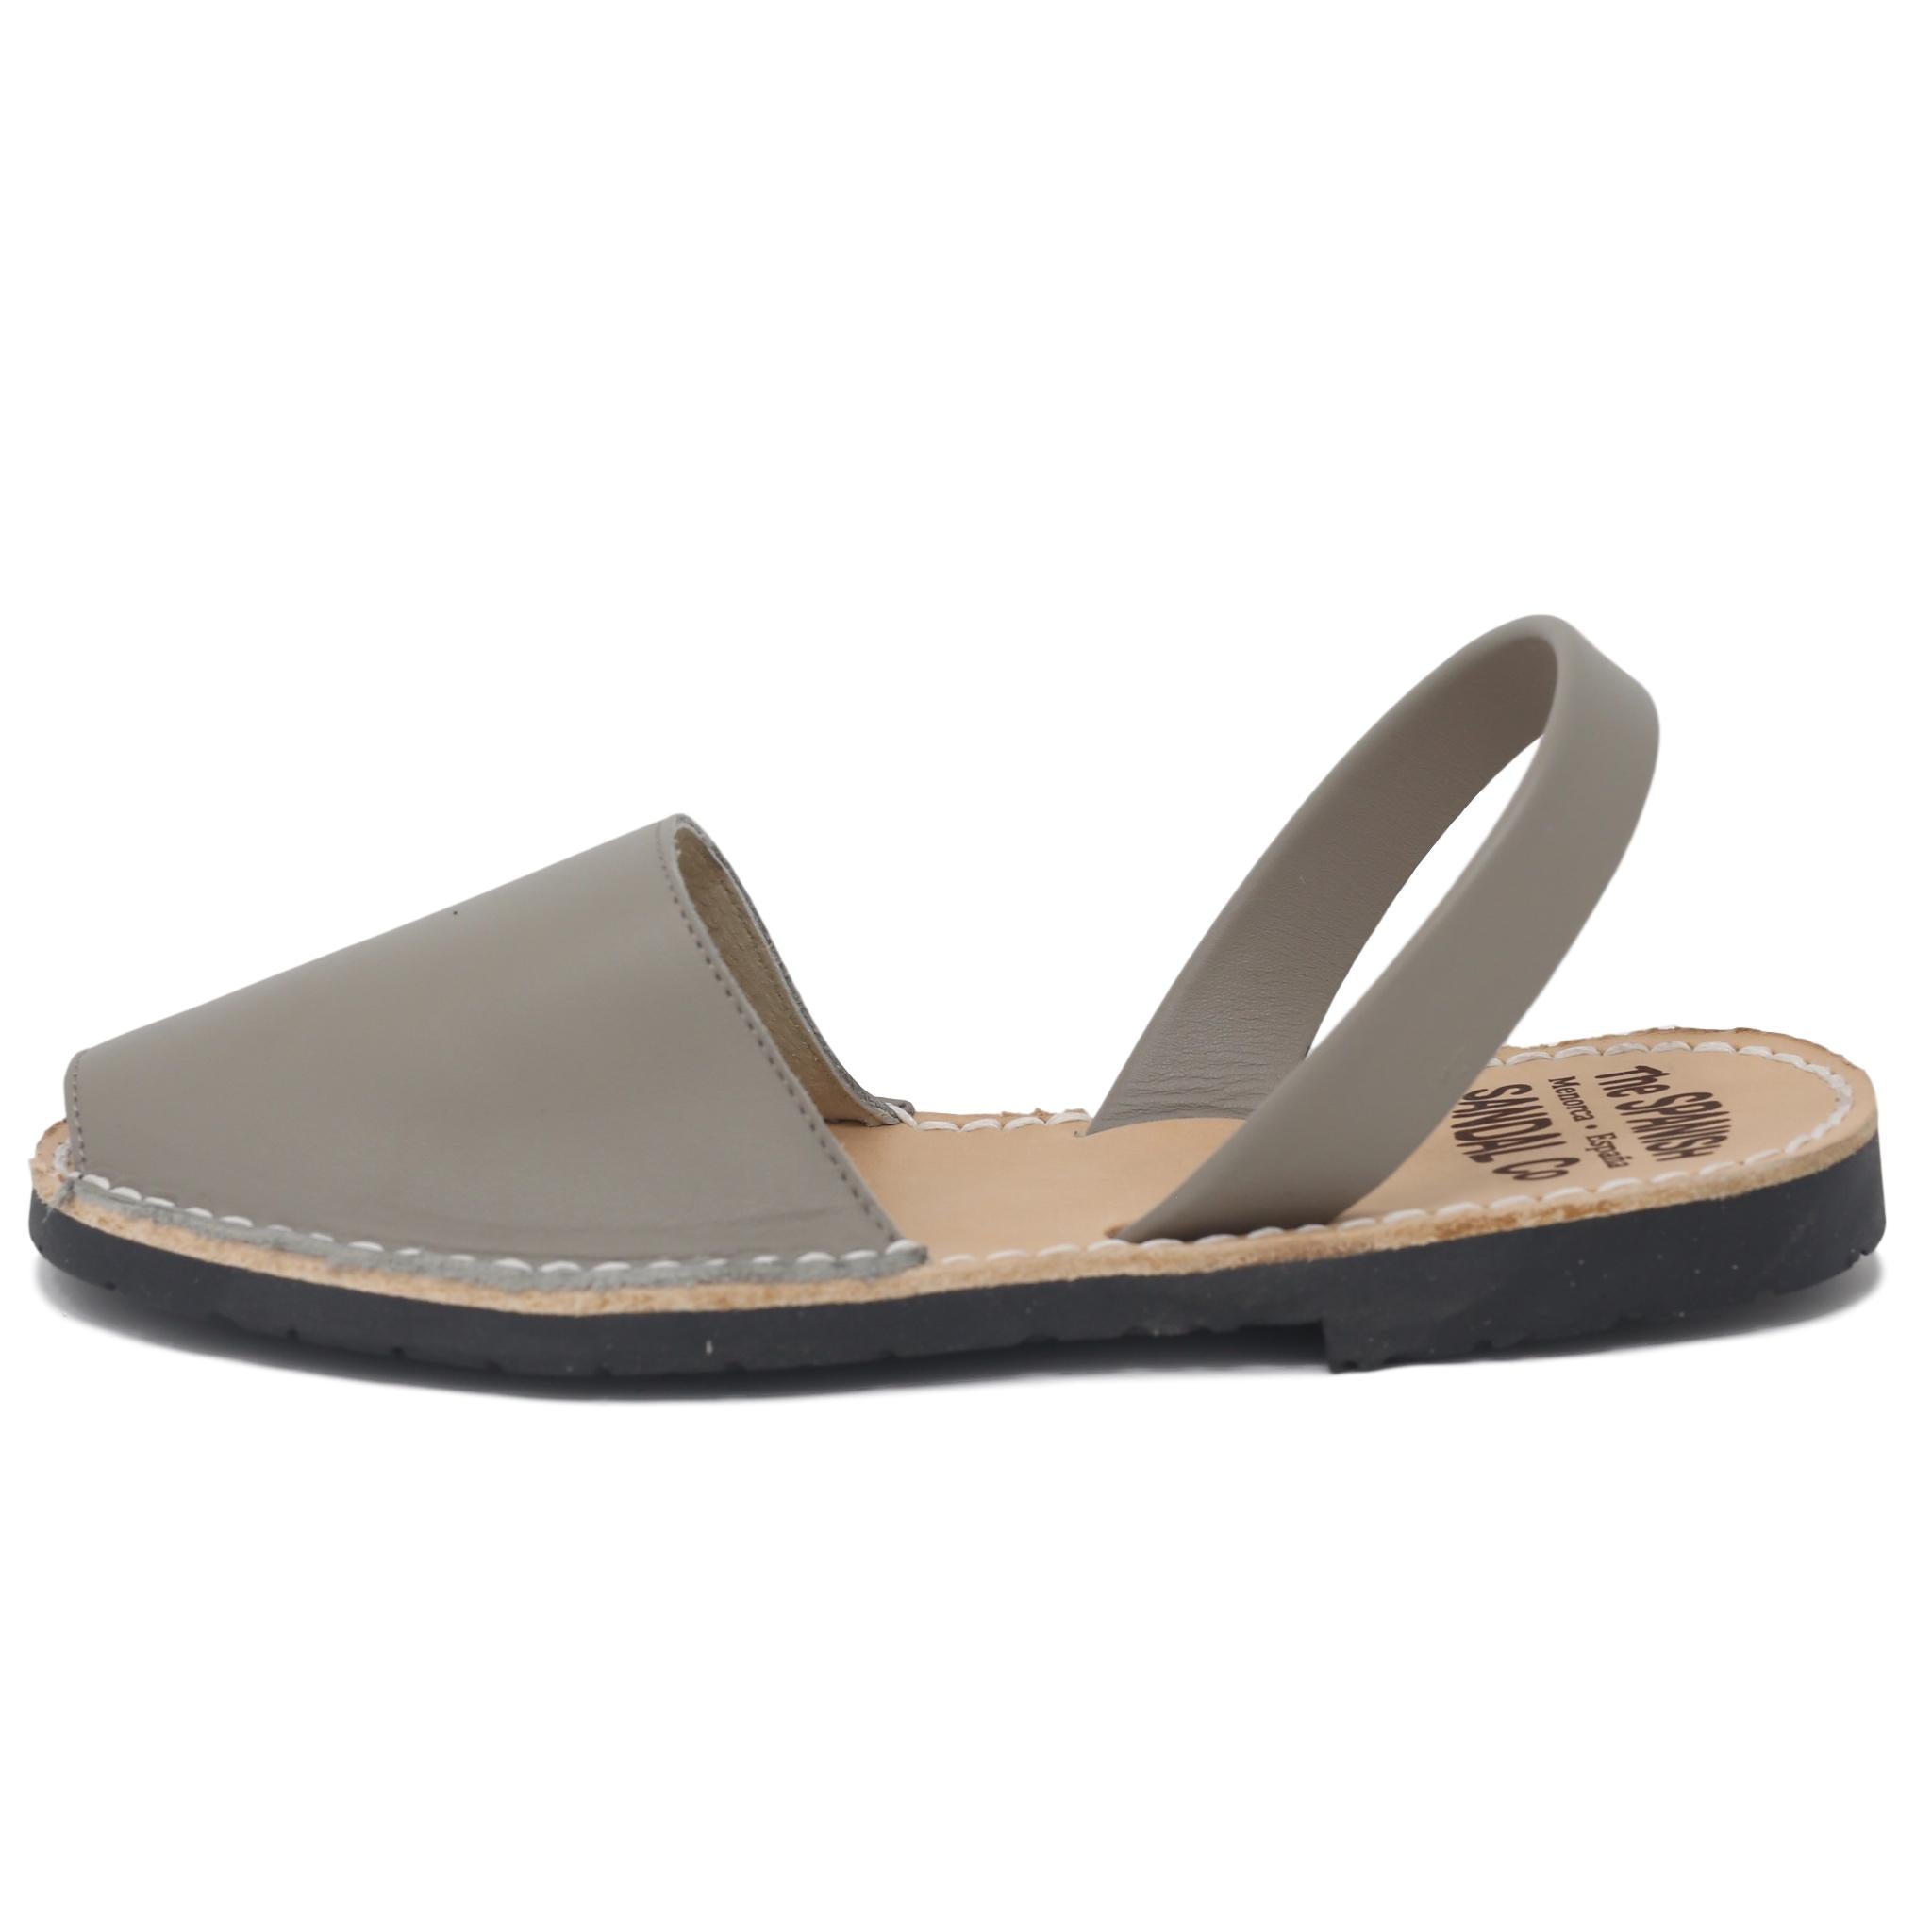 Classic taupe sandals - side view